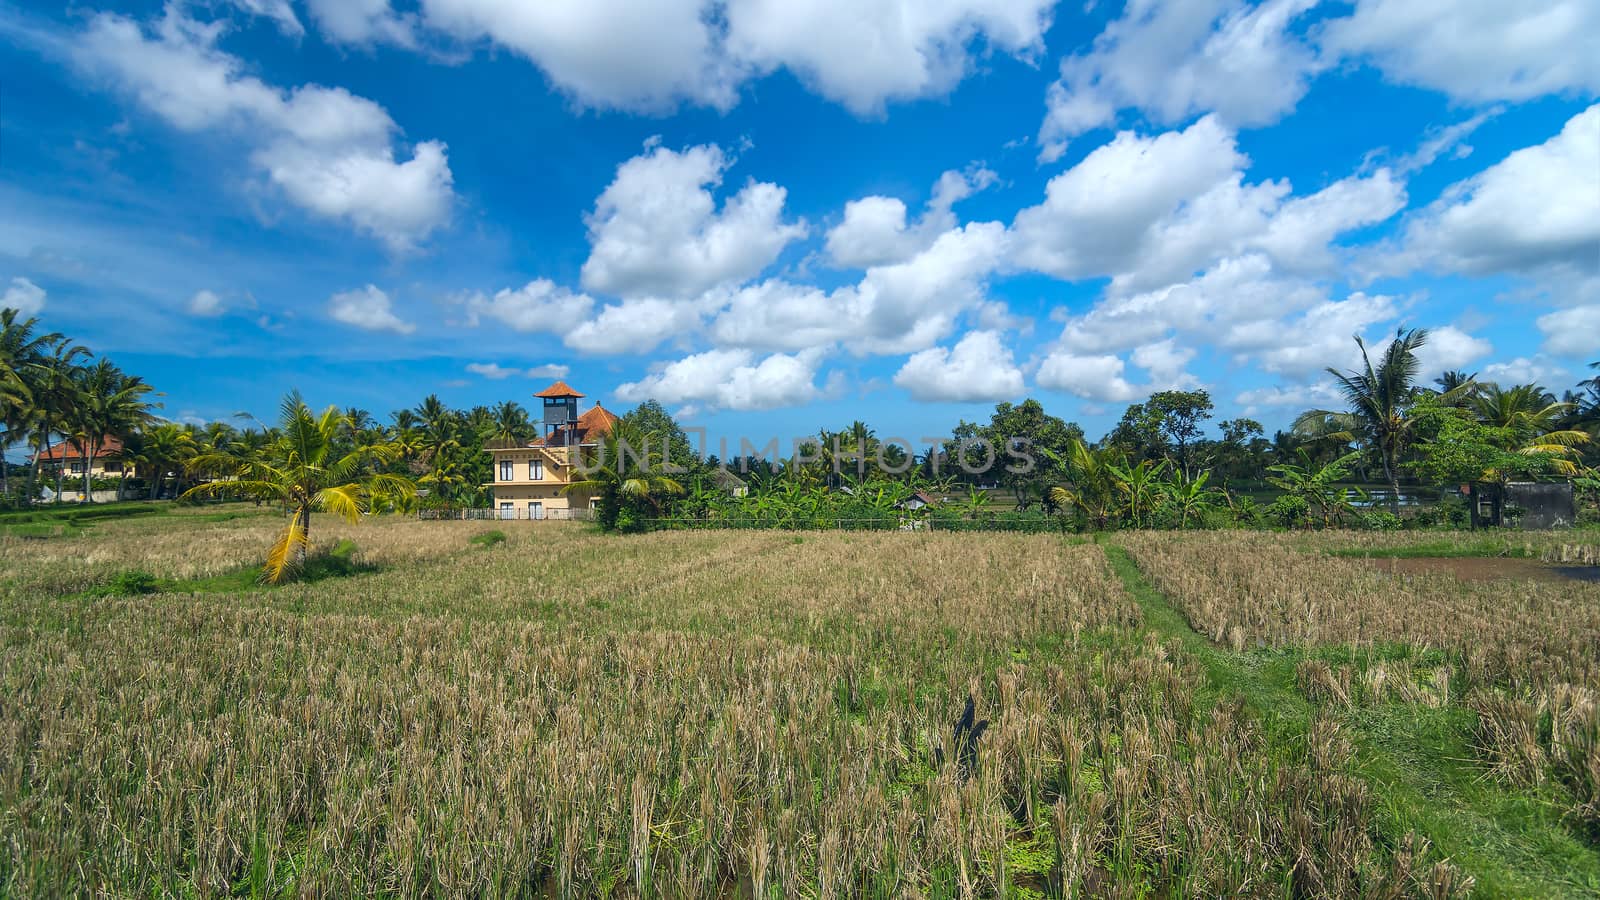 Lonely house on rice field at the town of Ubud in Bali in sunny  by BIG_TAU